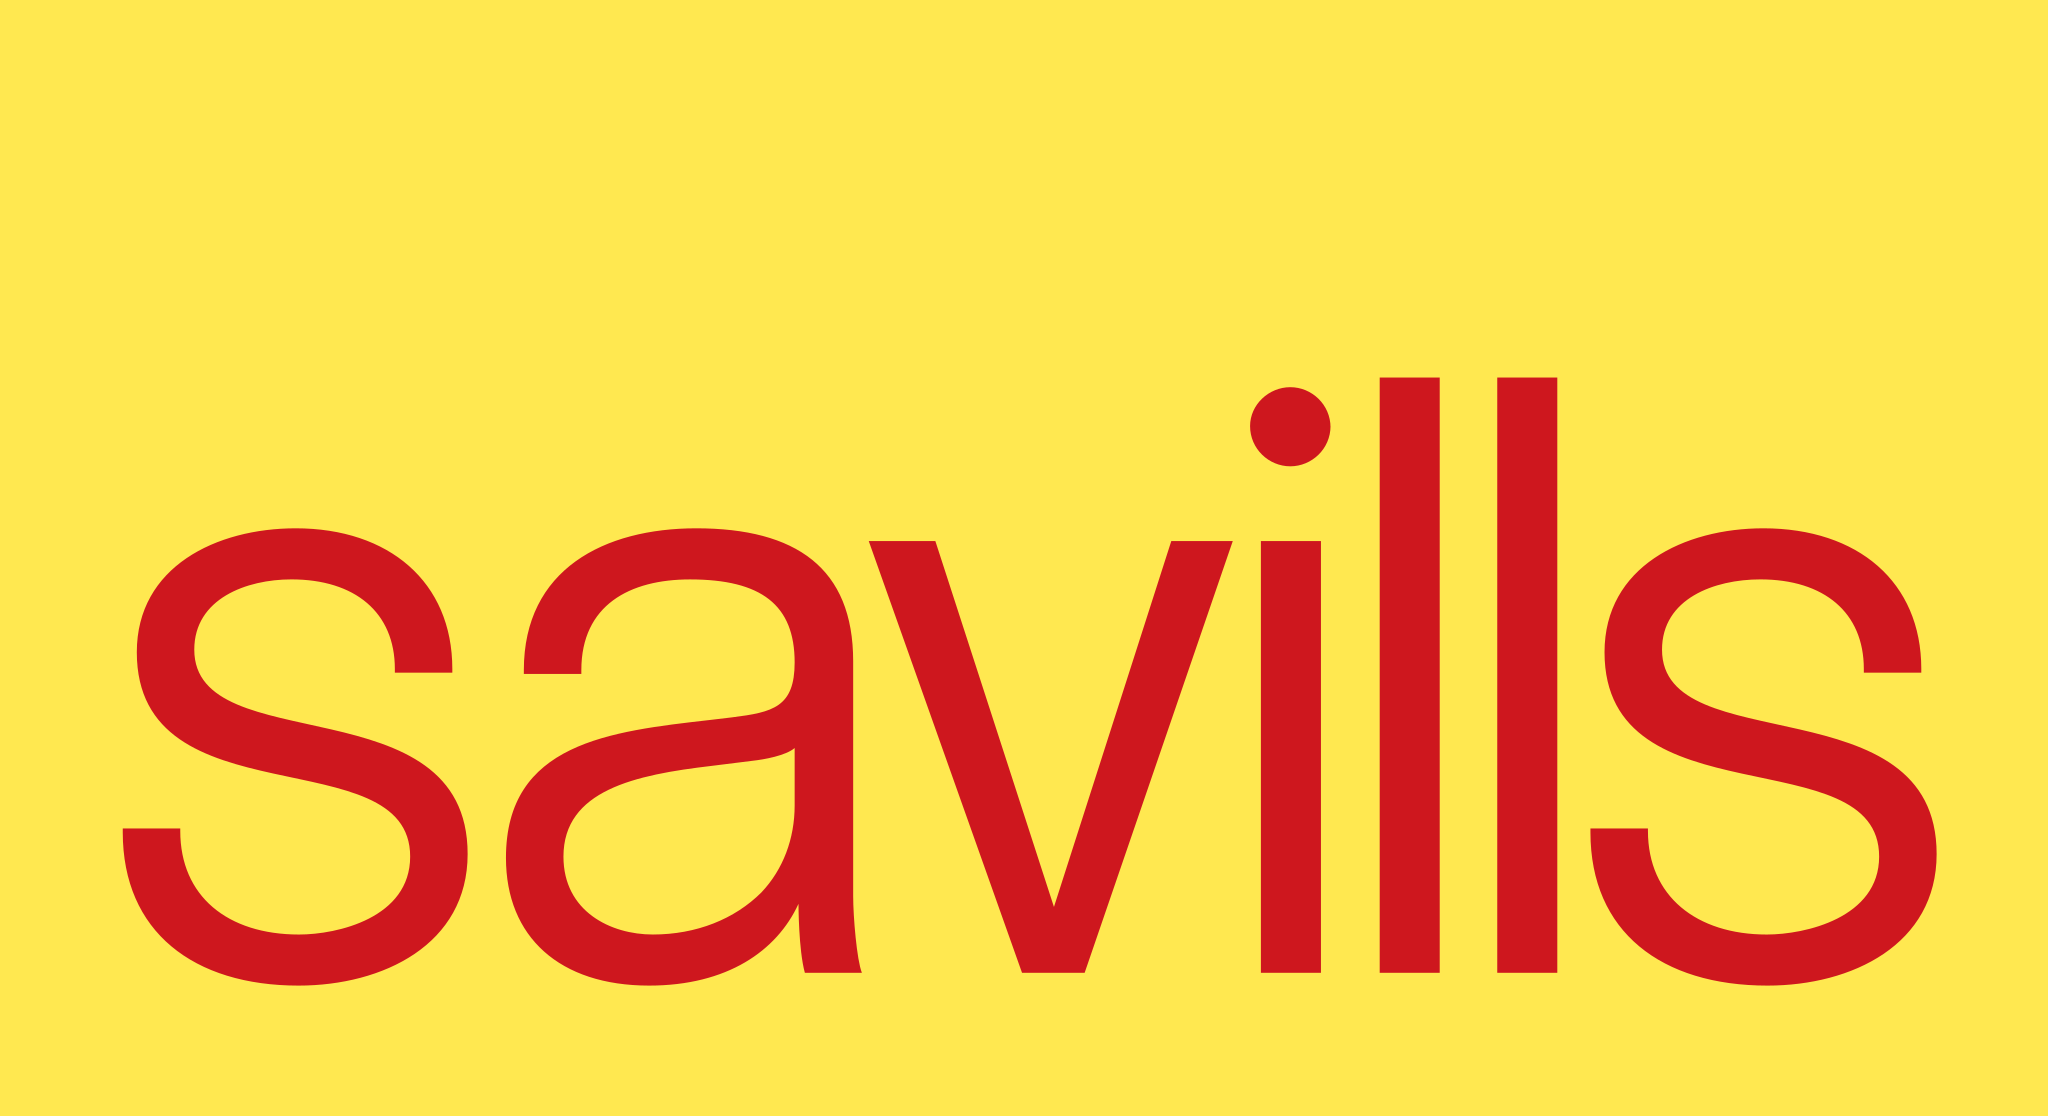 Savills logo - the word 'Savills' in red text on a yellow background